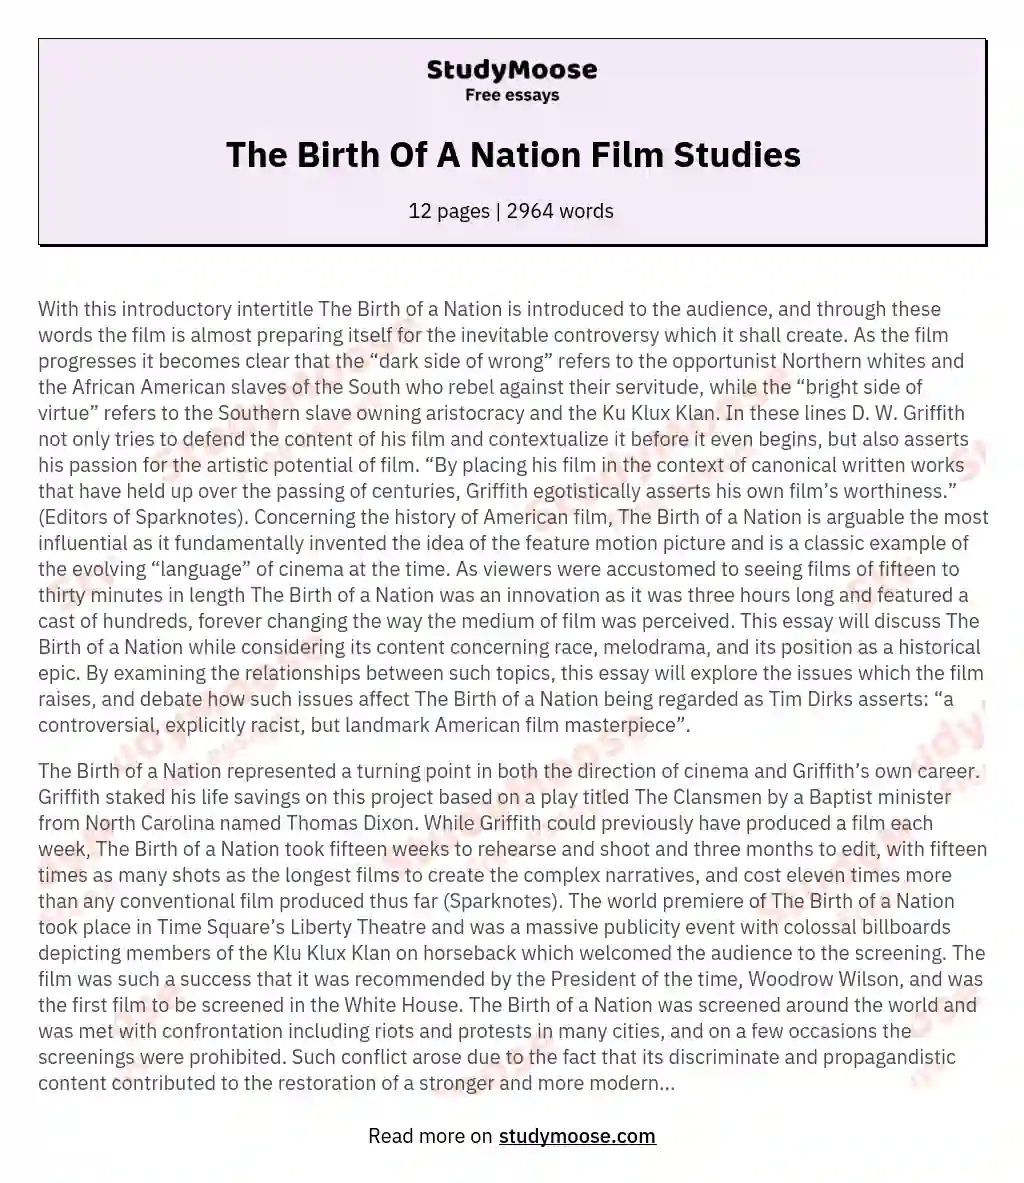 The Birth Of A Nation Film Studies essay